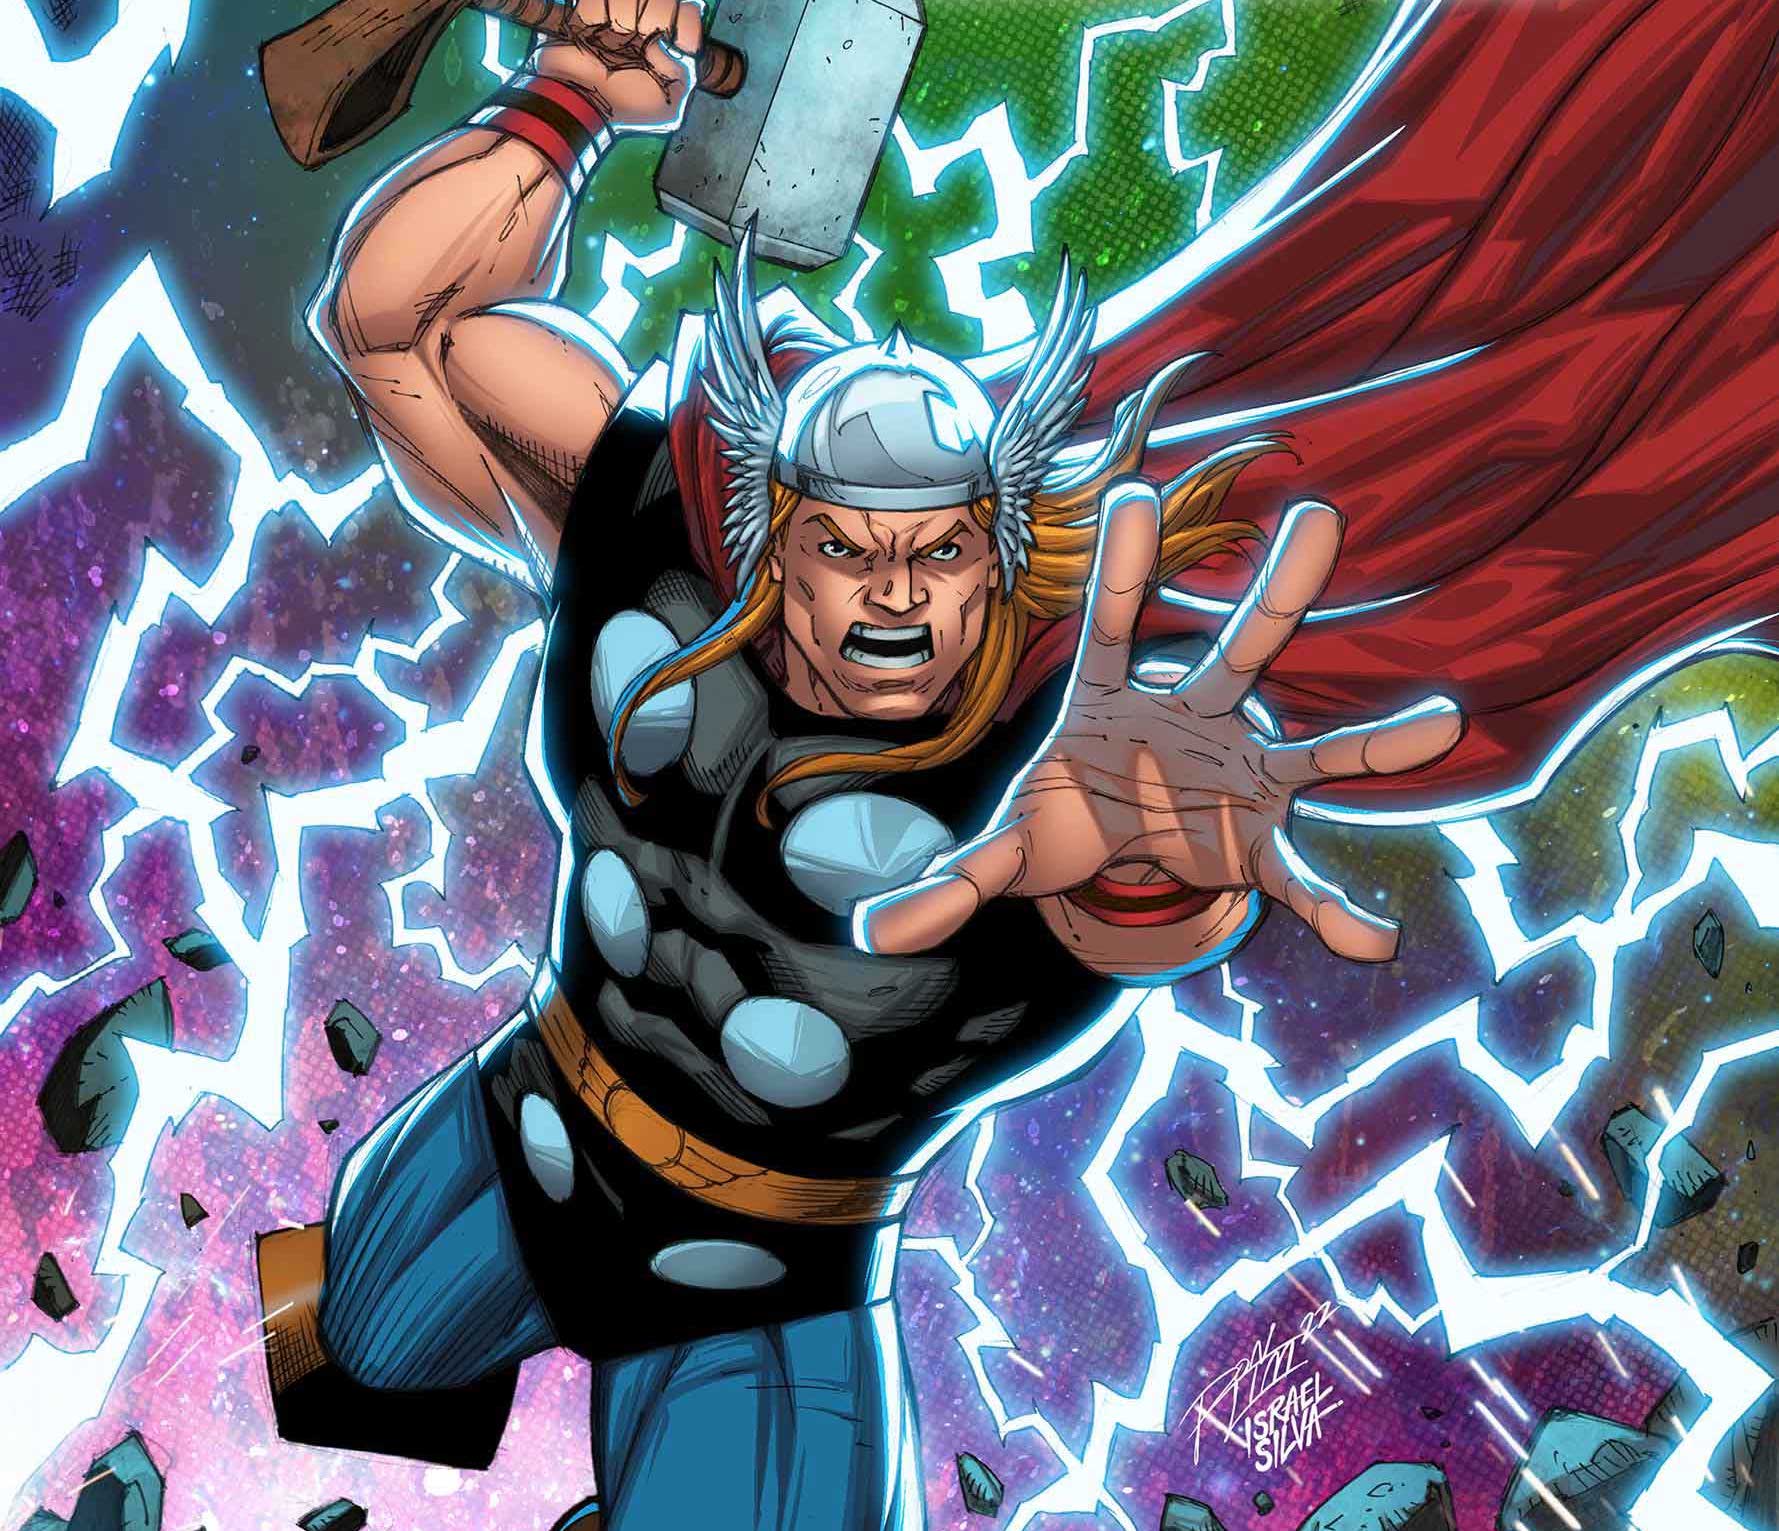 'Thor: Lightning and Lament' #1 has tons of action and great art